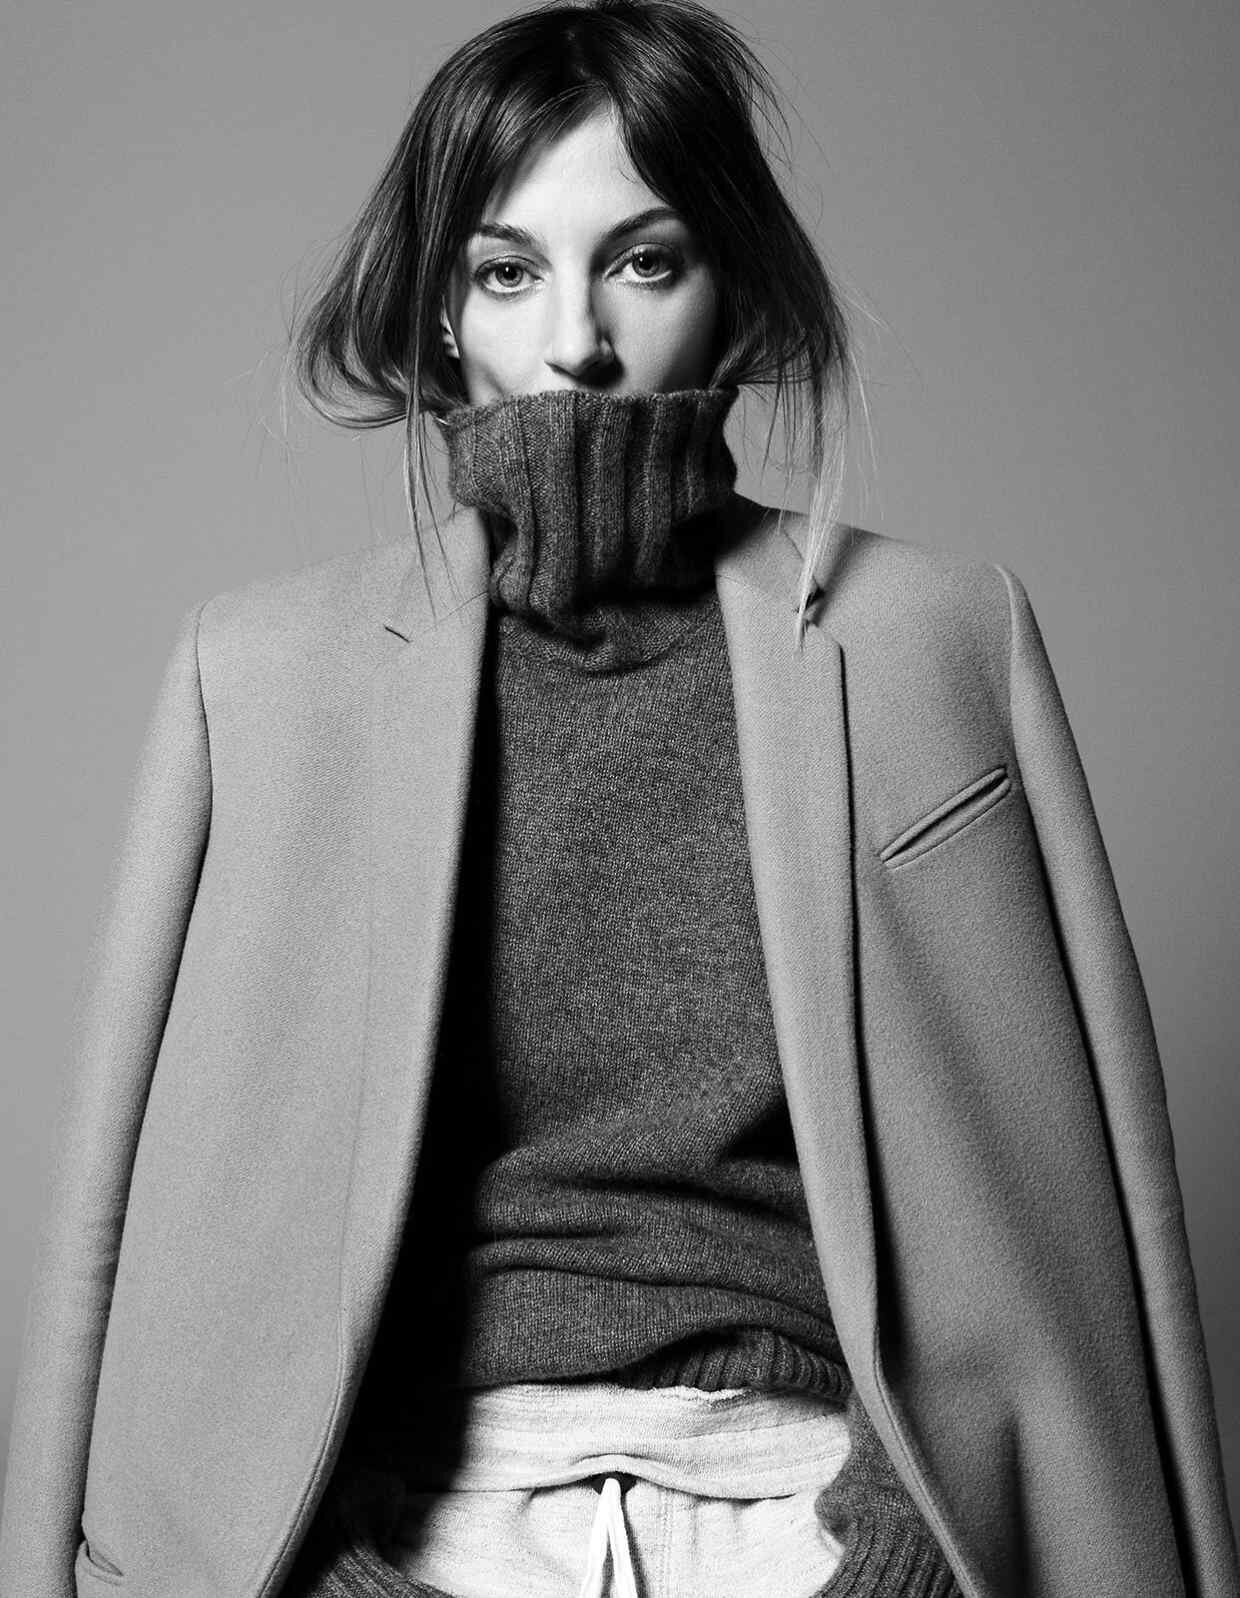 Phoebe Philo photographed in her London home by David Sims. Photo